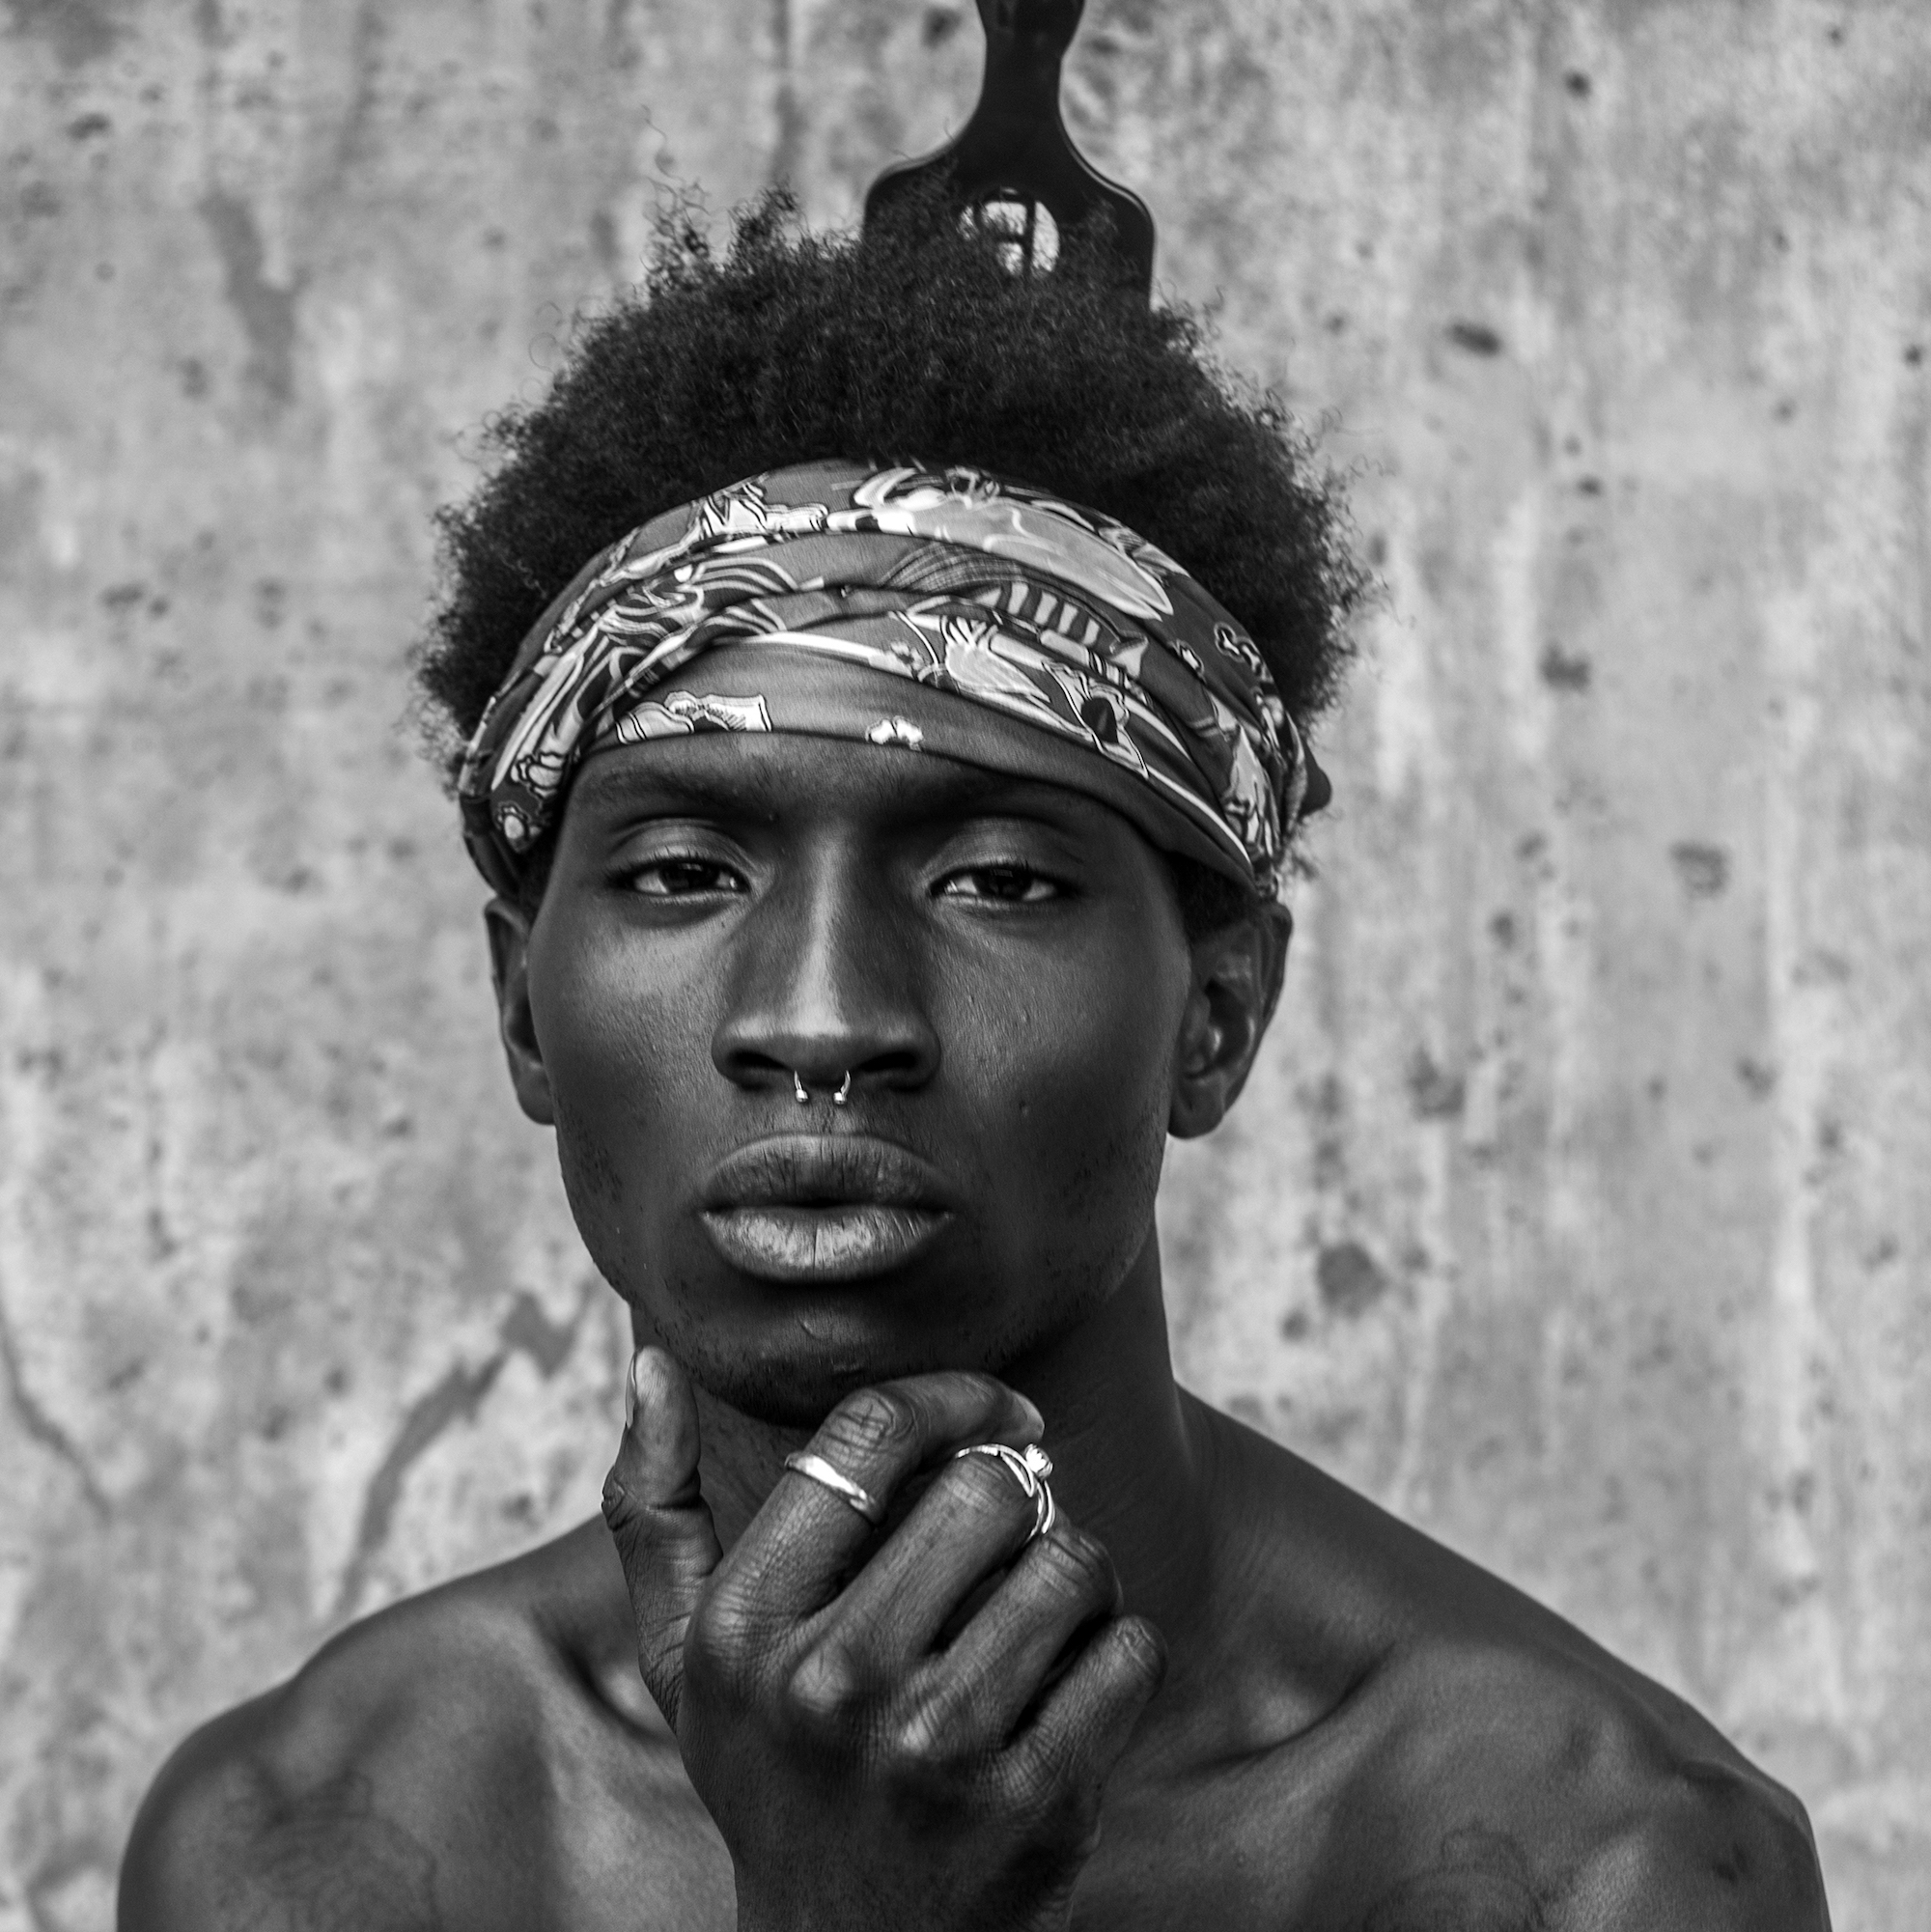 From Model To Music Artist: Interview With Adonis Bosso